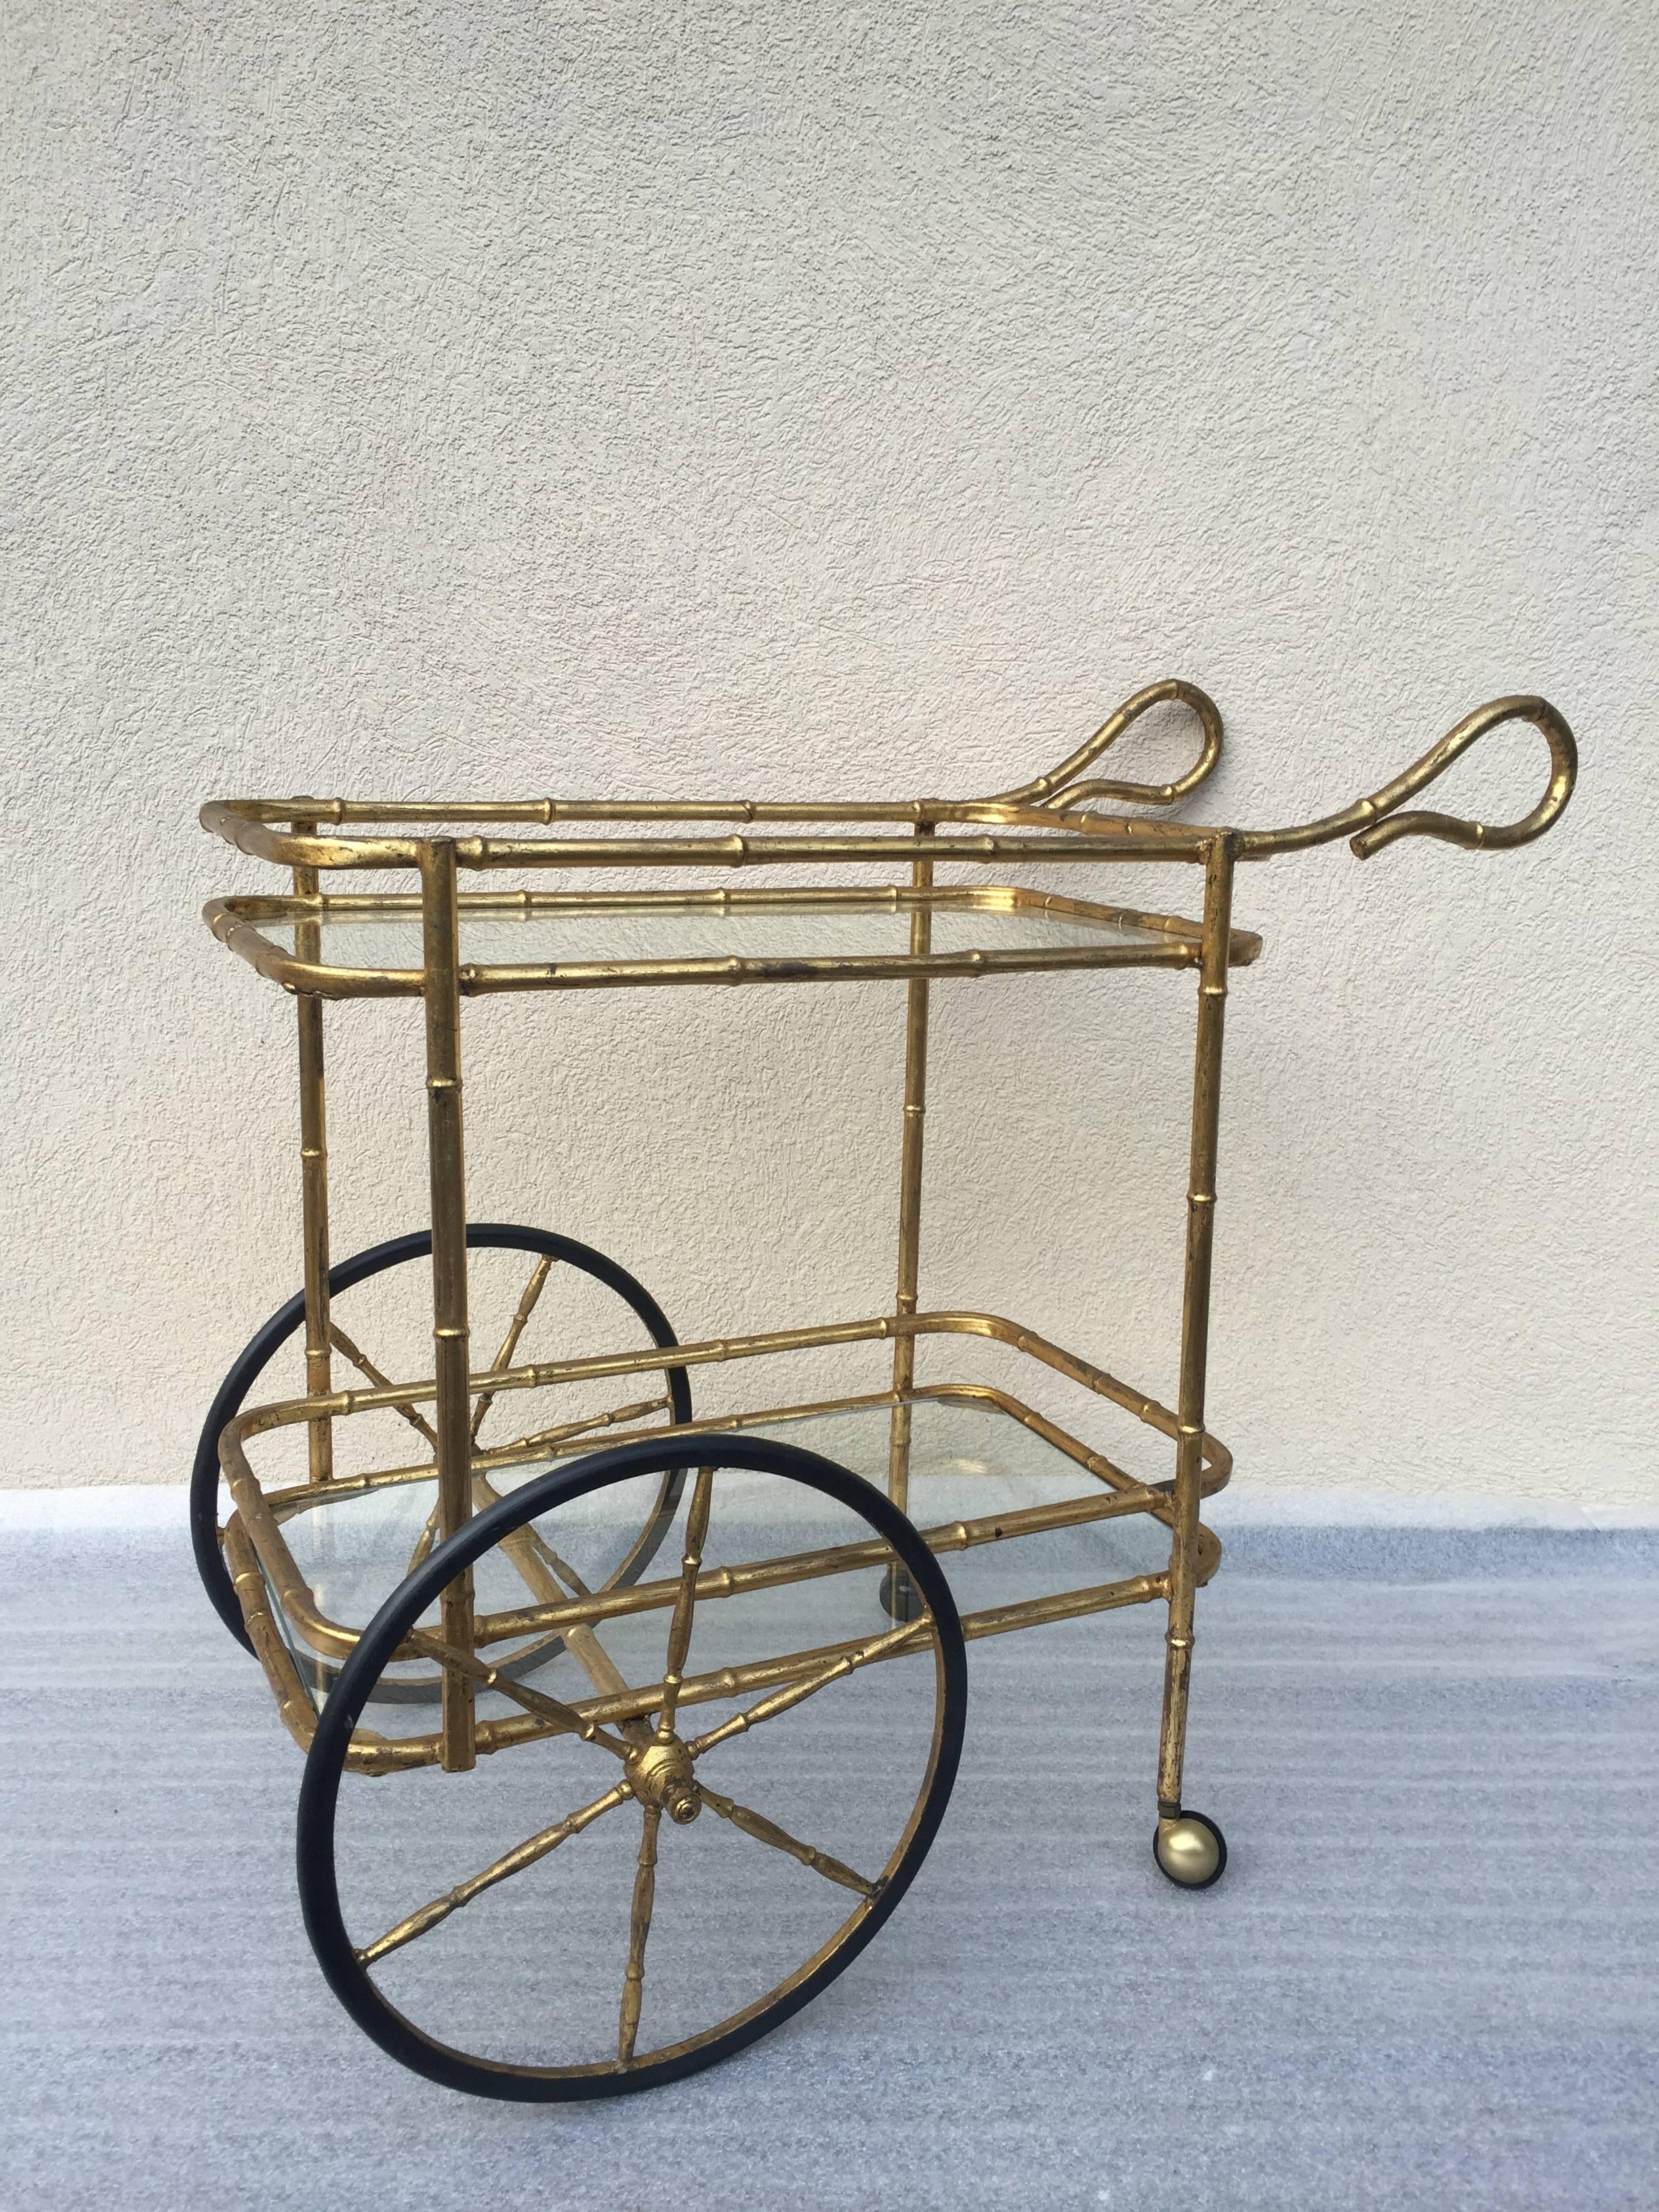 Gilt bamboo iron rolling bar cart two-tier, with large rubber wheels and curled arms. Petite design.